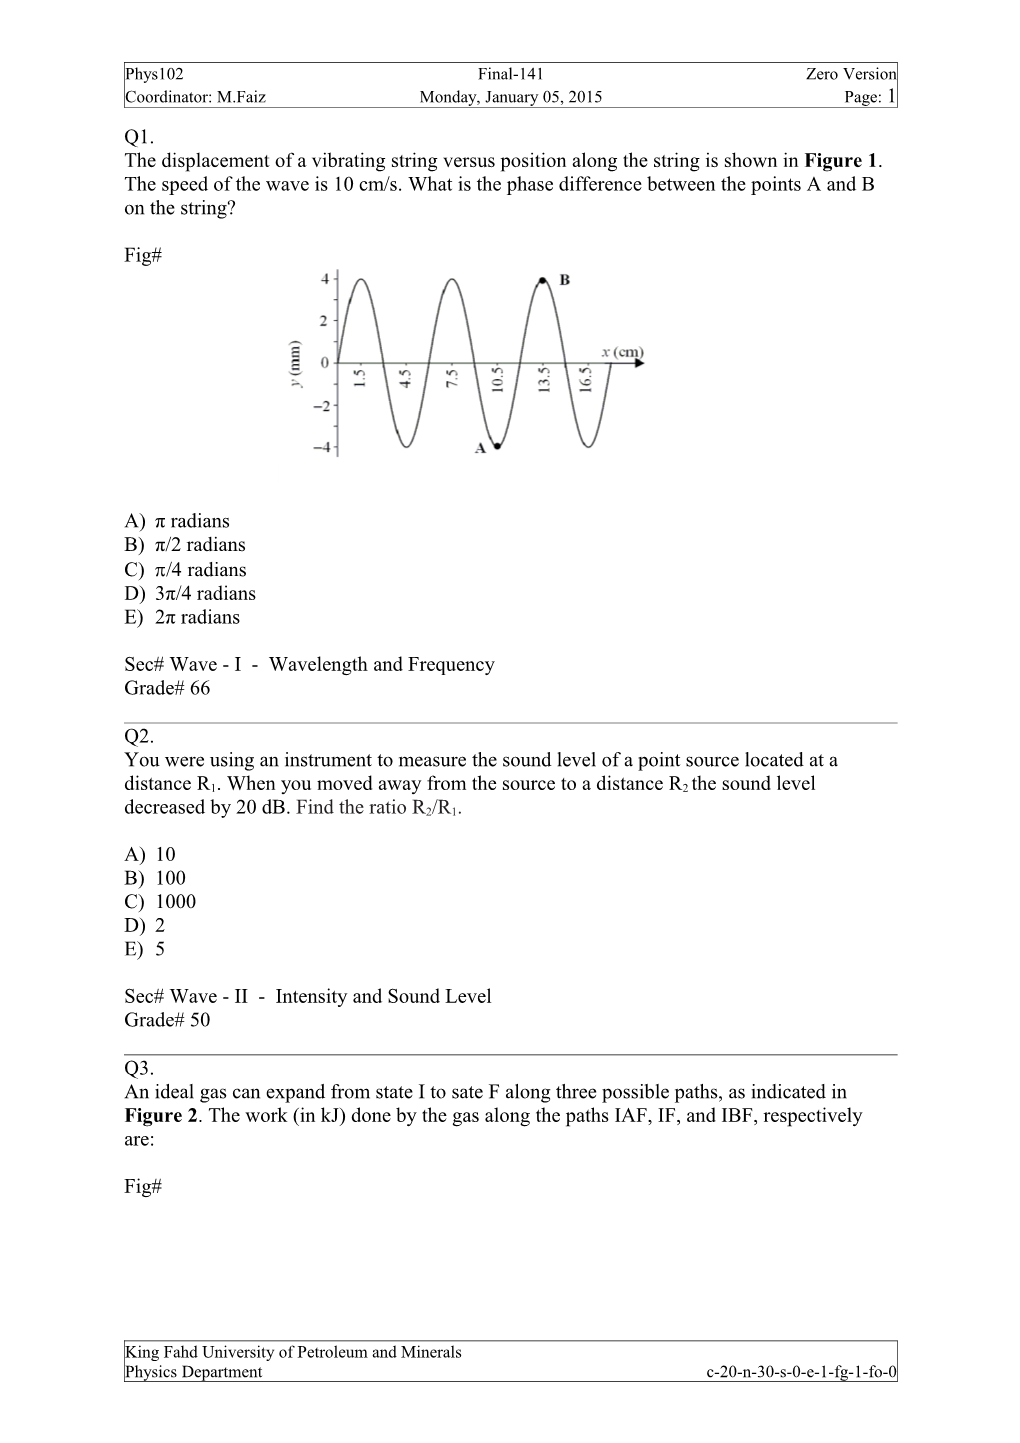 Sec# Wave - I - Wavelength and Frequency